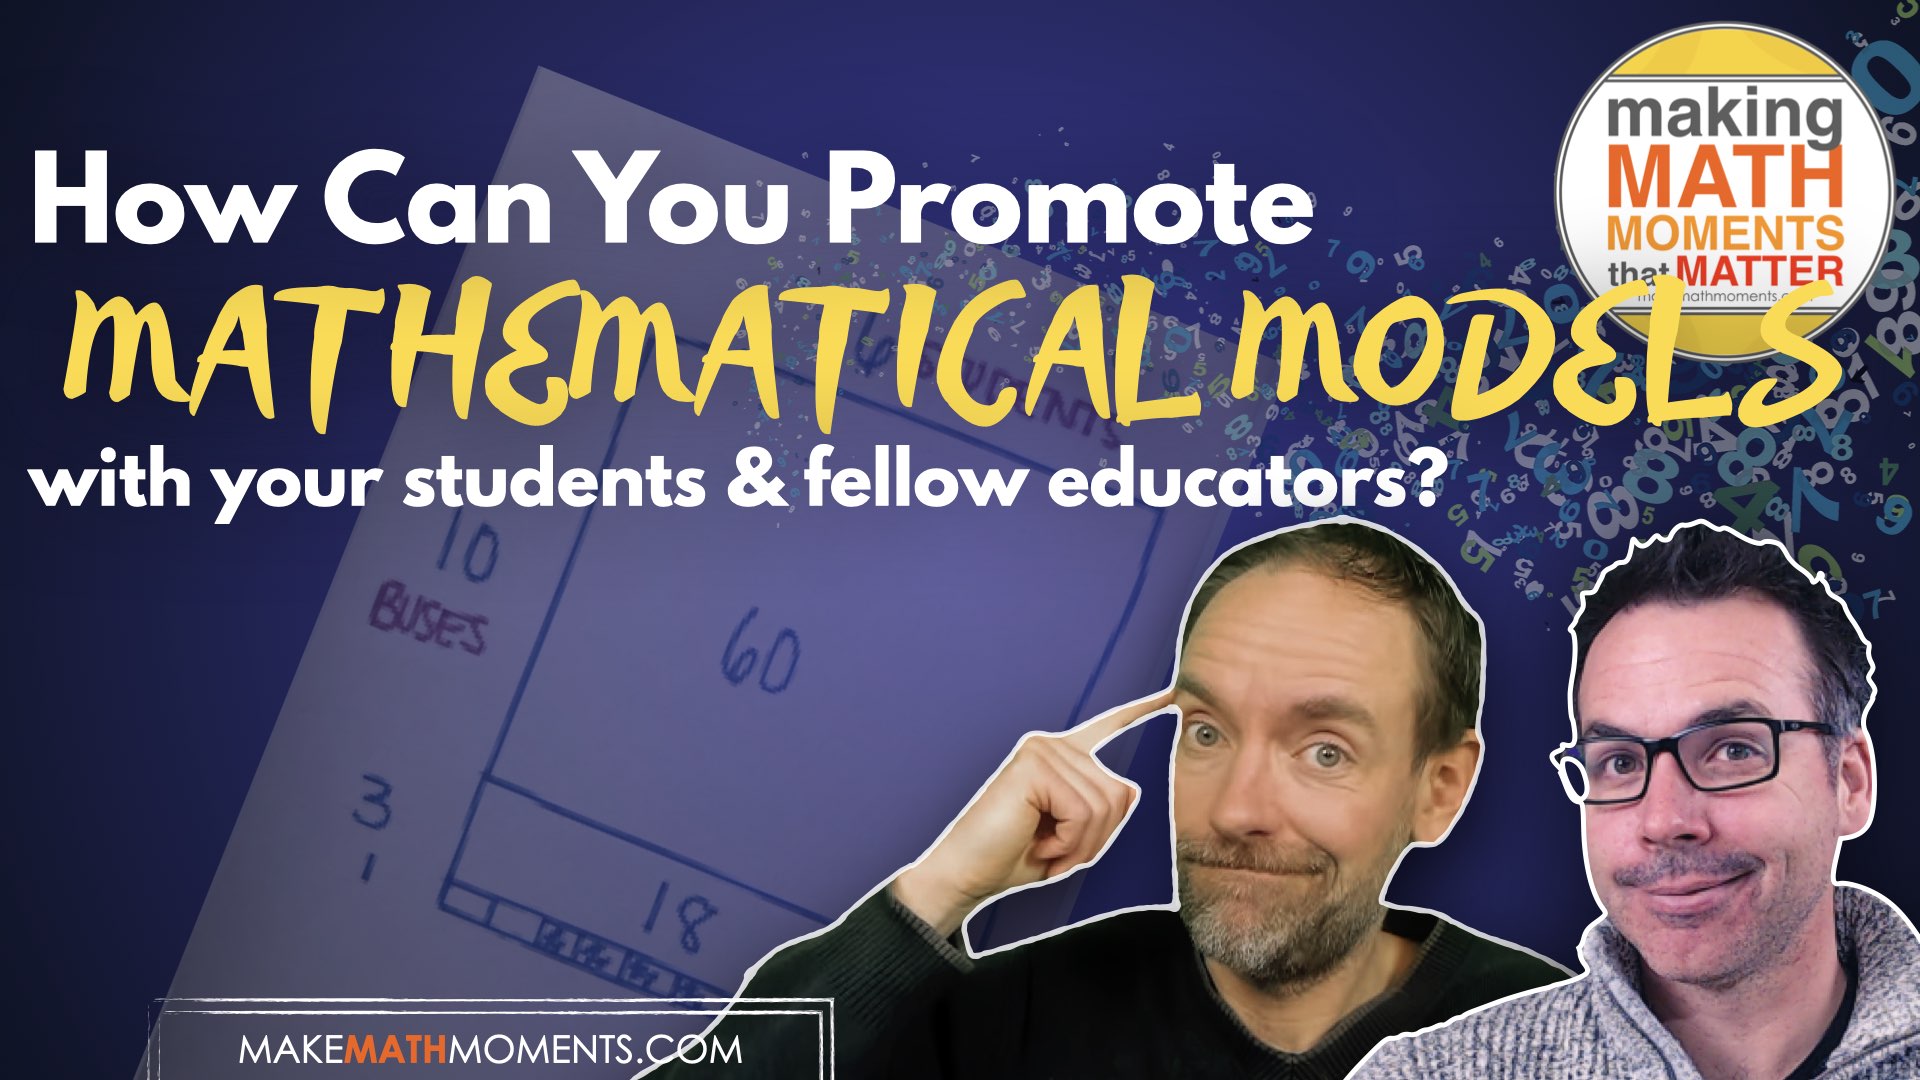 How Do I Promote Mathematical Models with My Students?